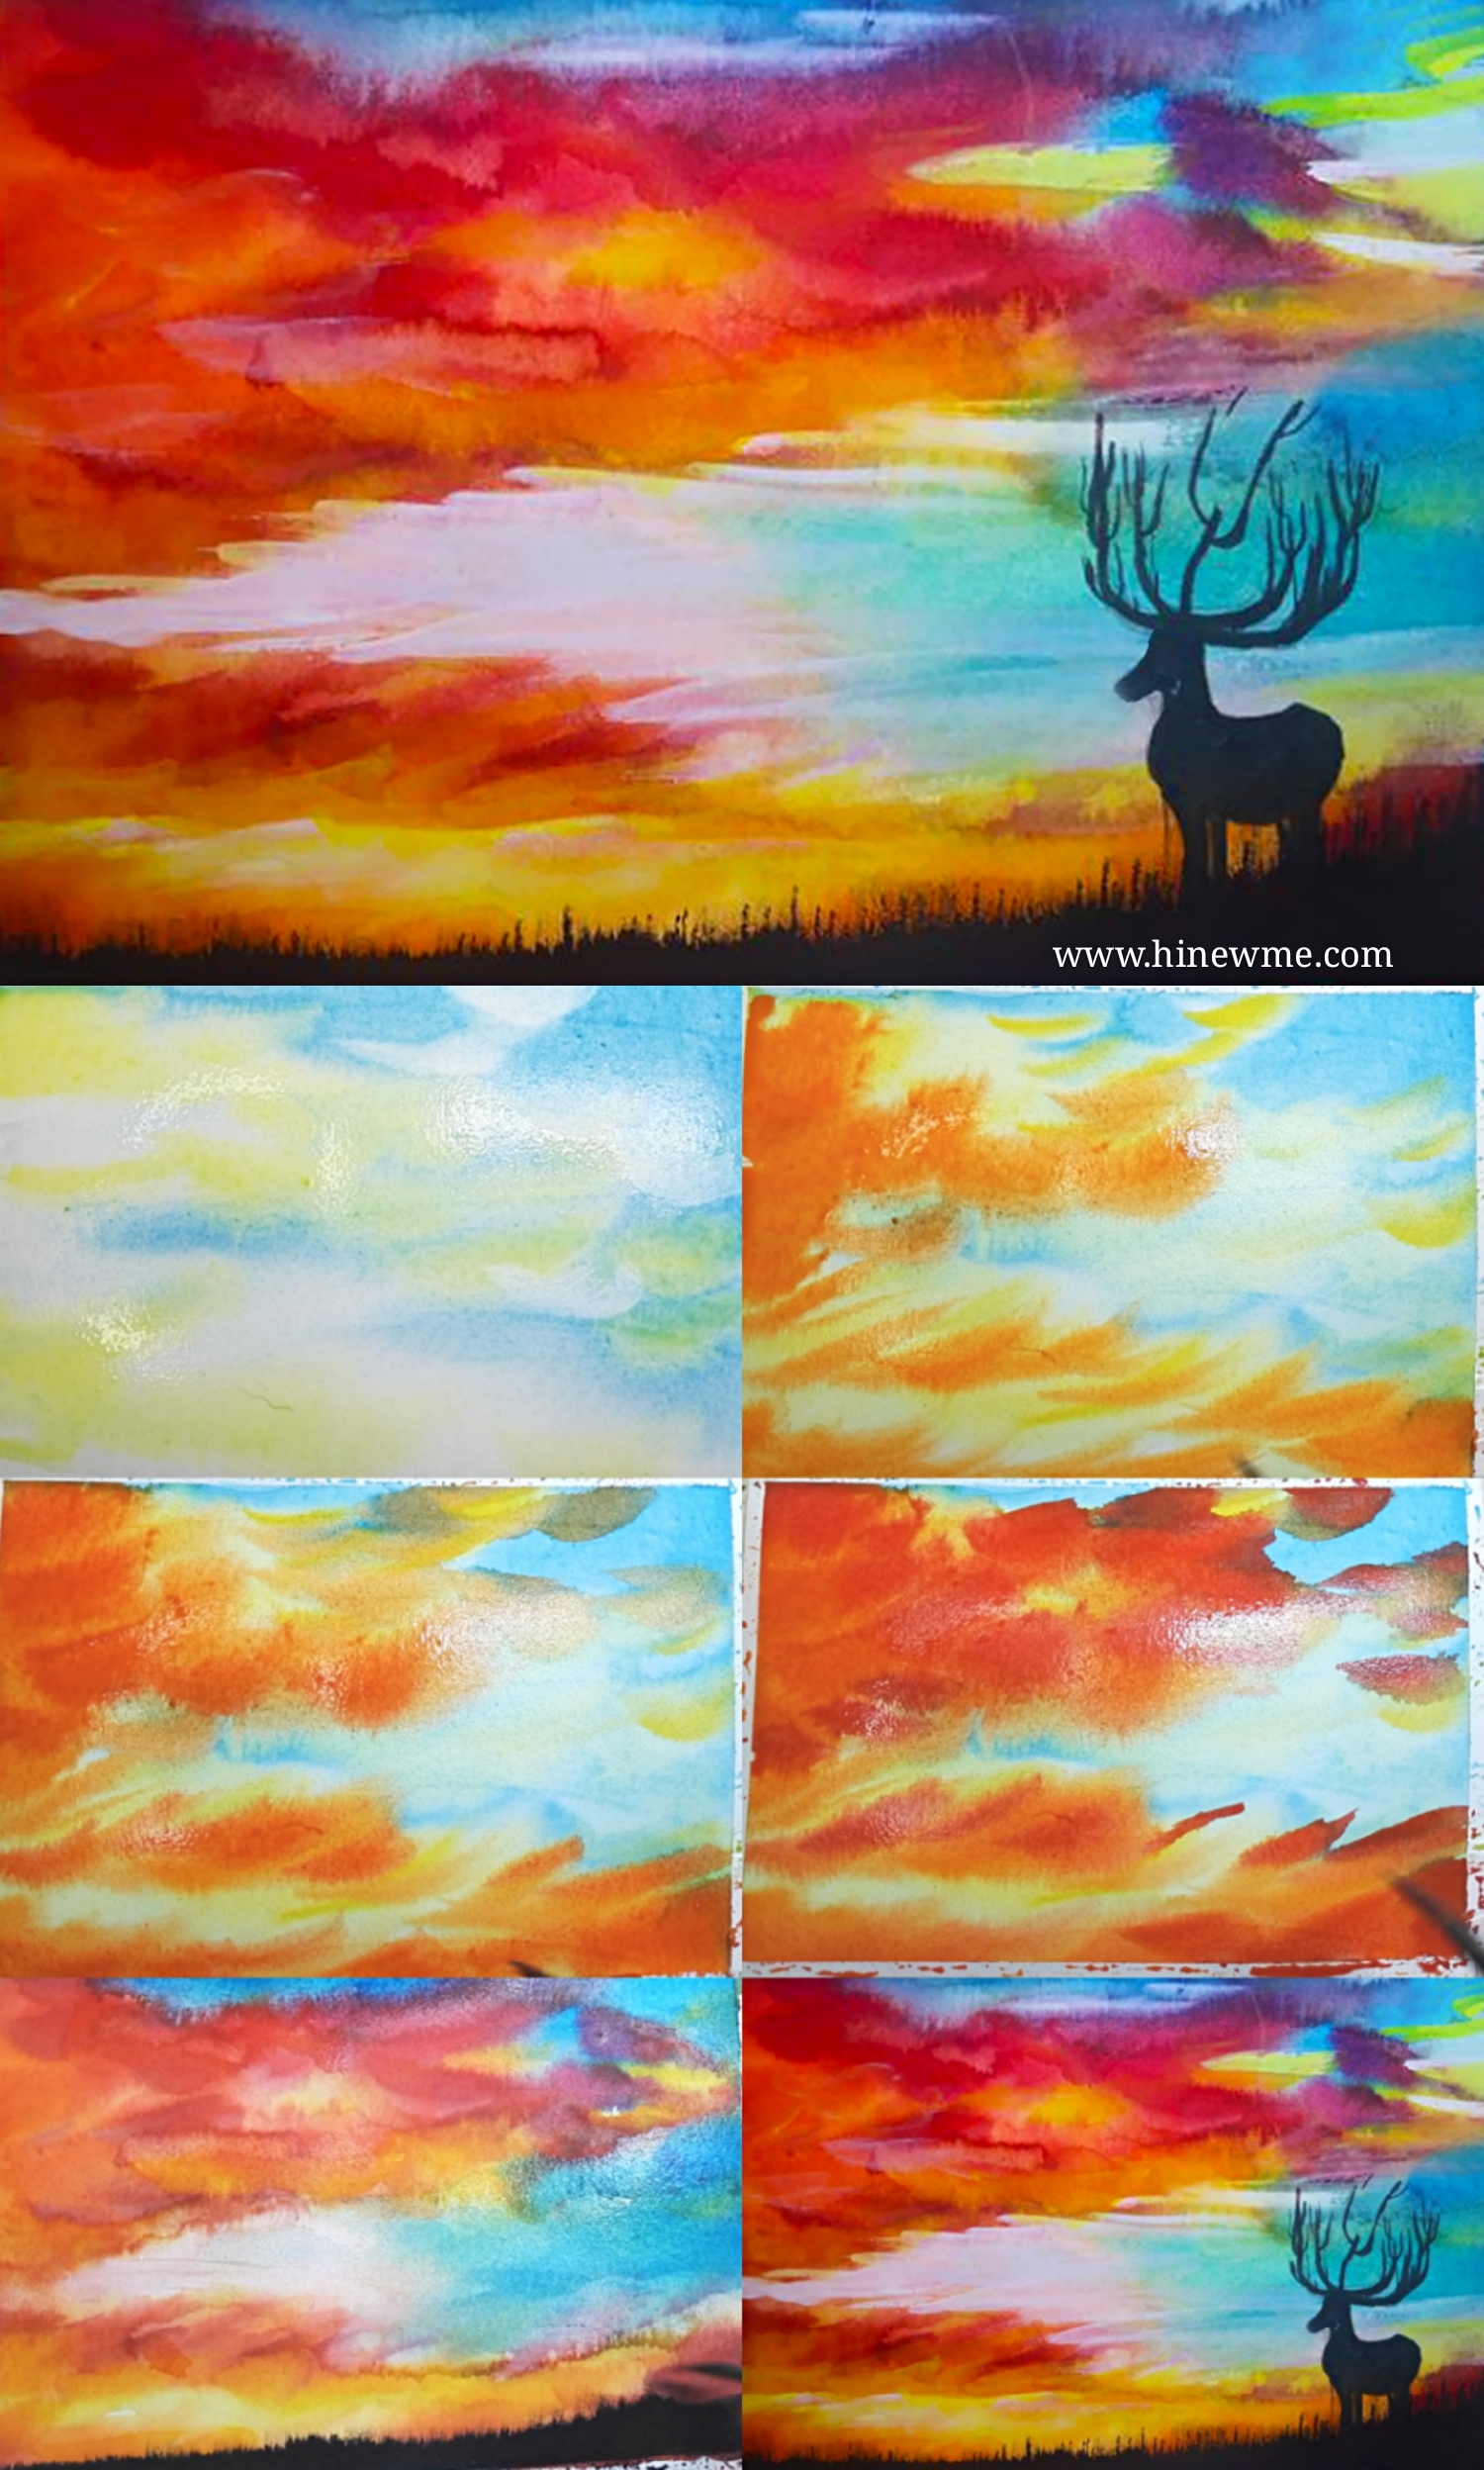 How to draw watercolor colorful sunset landscape step by step tutorial easy for beginner